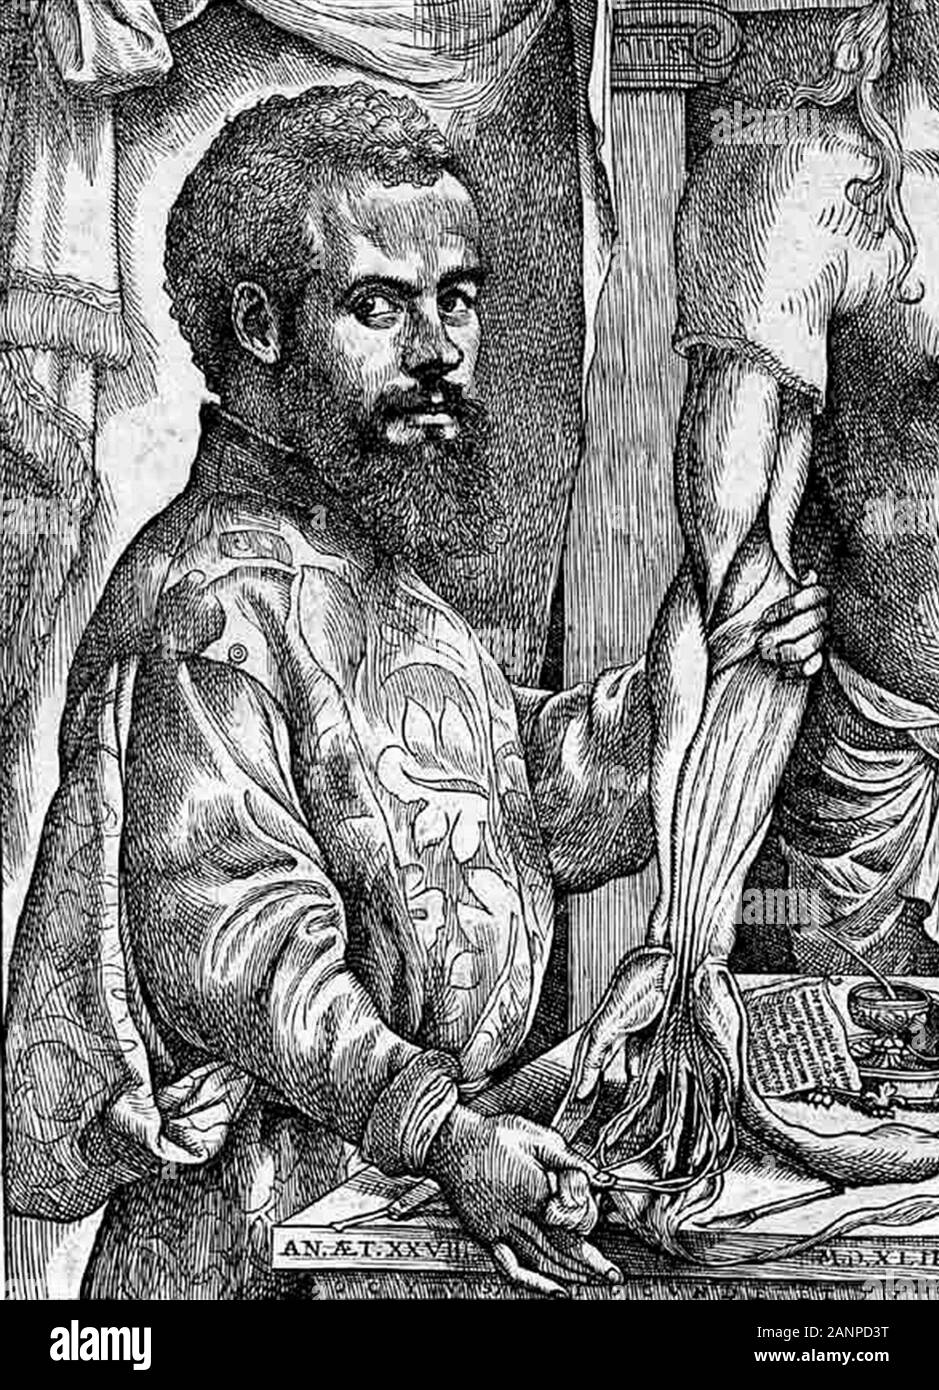 Andreas Vesalius (1514 – 1564) Flemish anatomist, physician, and author of one of the most influential books on human anatomy, De humani corporis fabrica (On the Fabric of the Human Body) Stock Photo